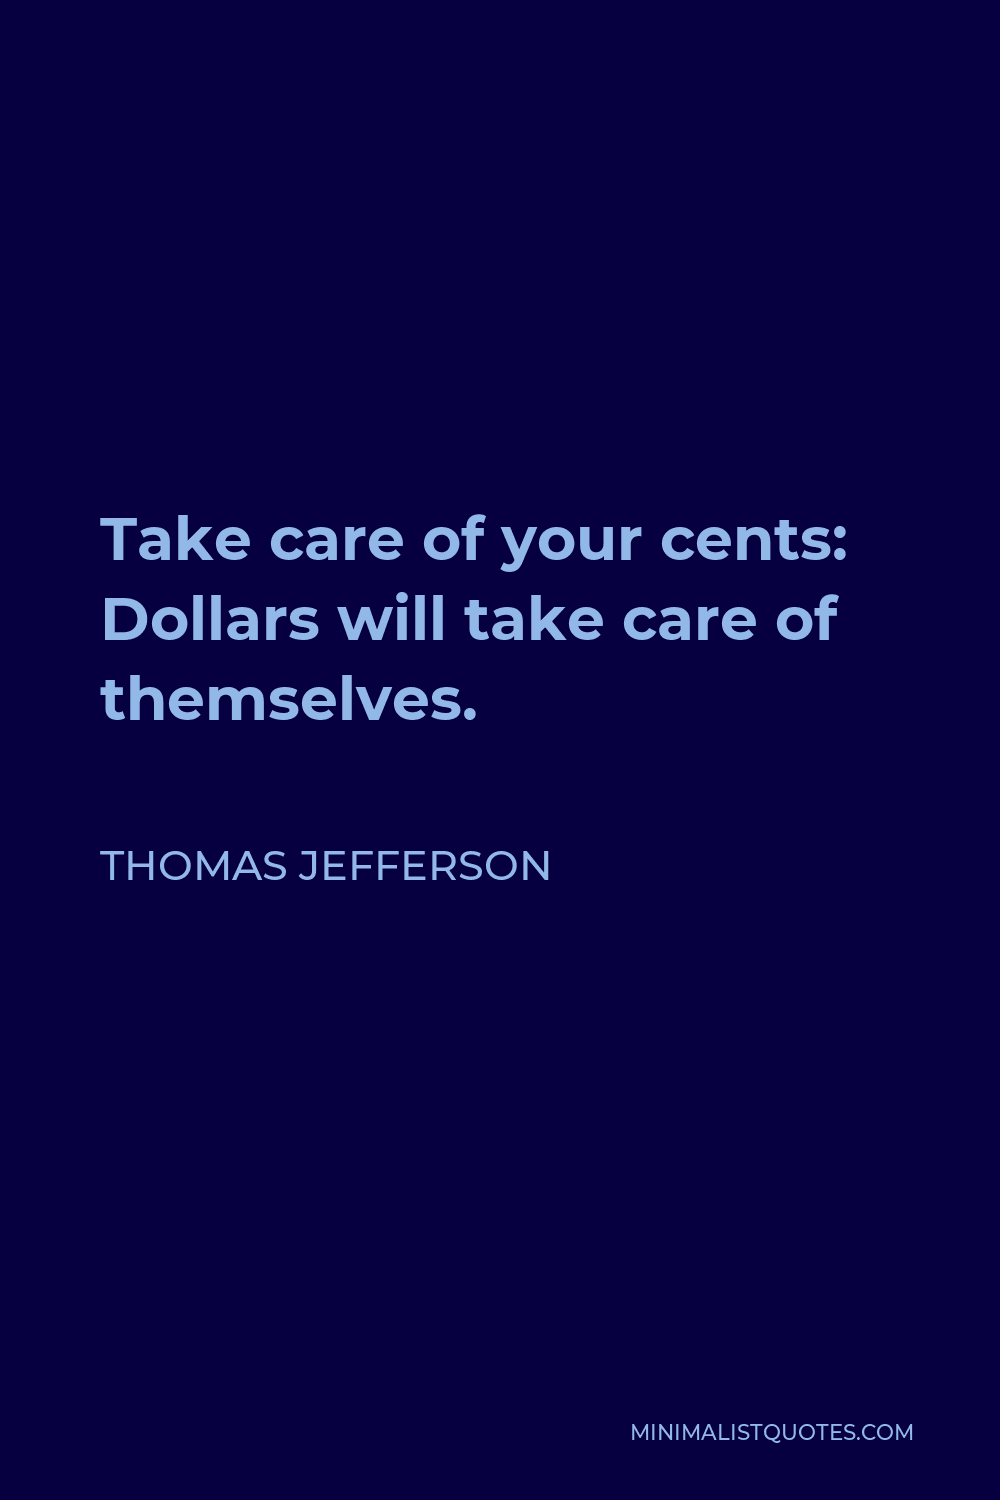 Thomas Jefferson Quote - Take care of your cents: Dollars will take care of themselves.